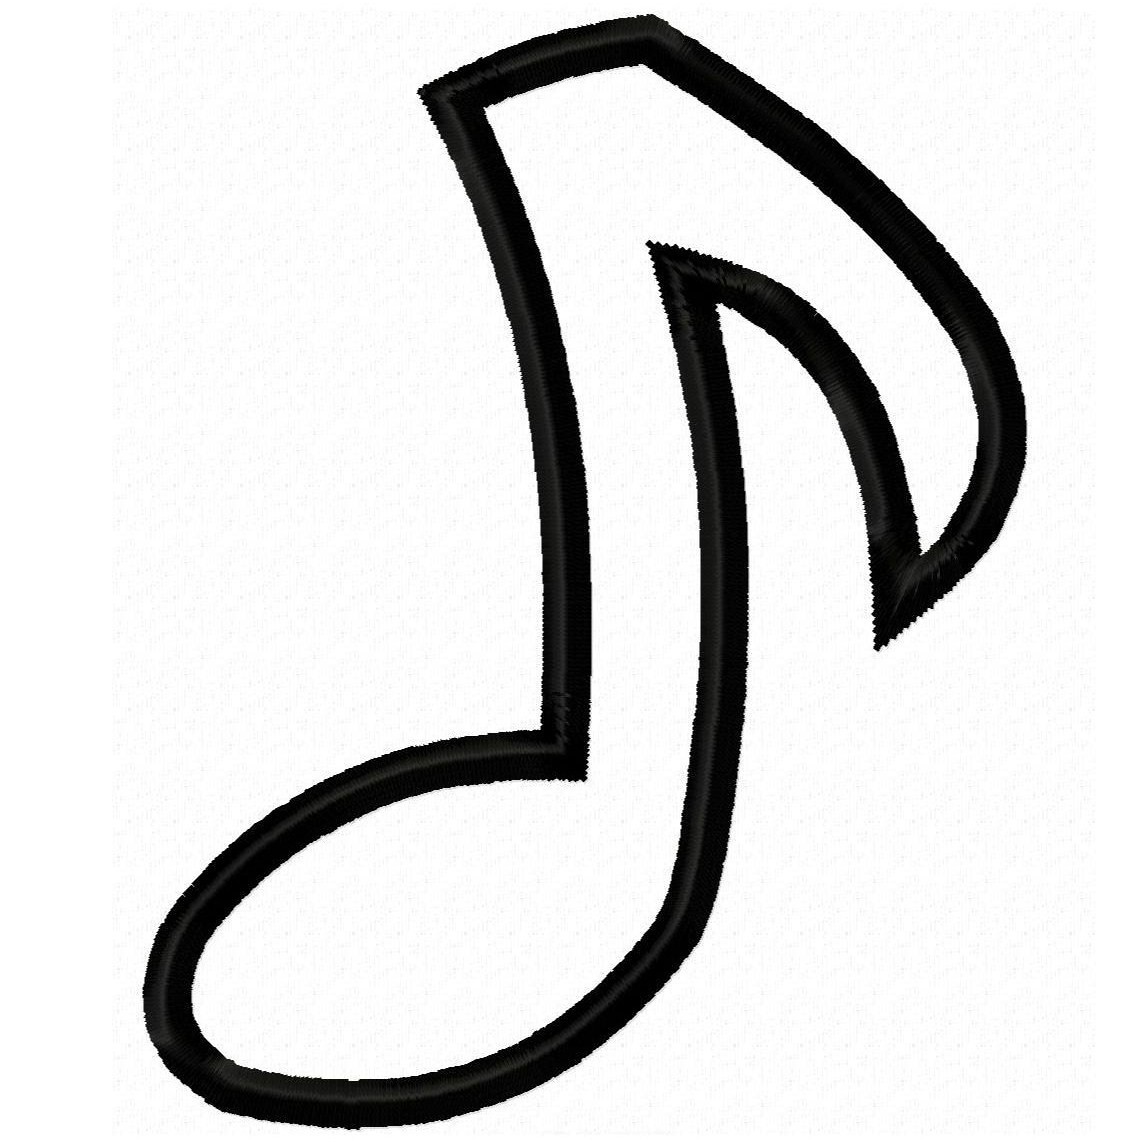 Music Notes Symbol Tattoo Designs Cake - ClipArt Best - ClipArt Best